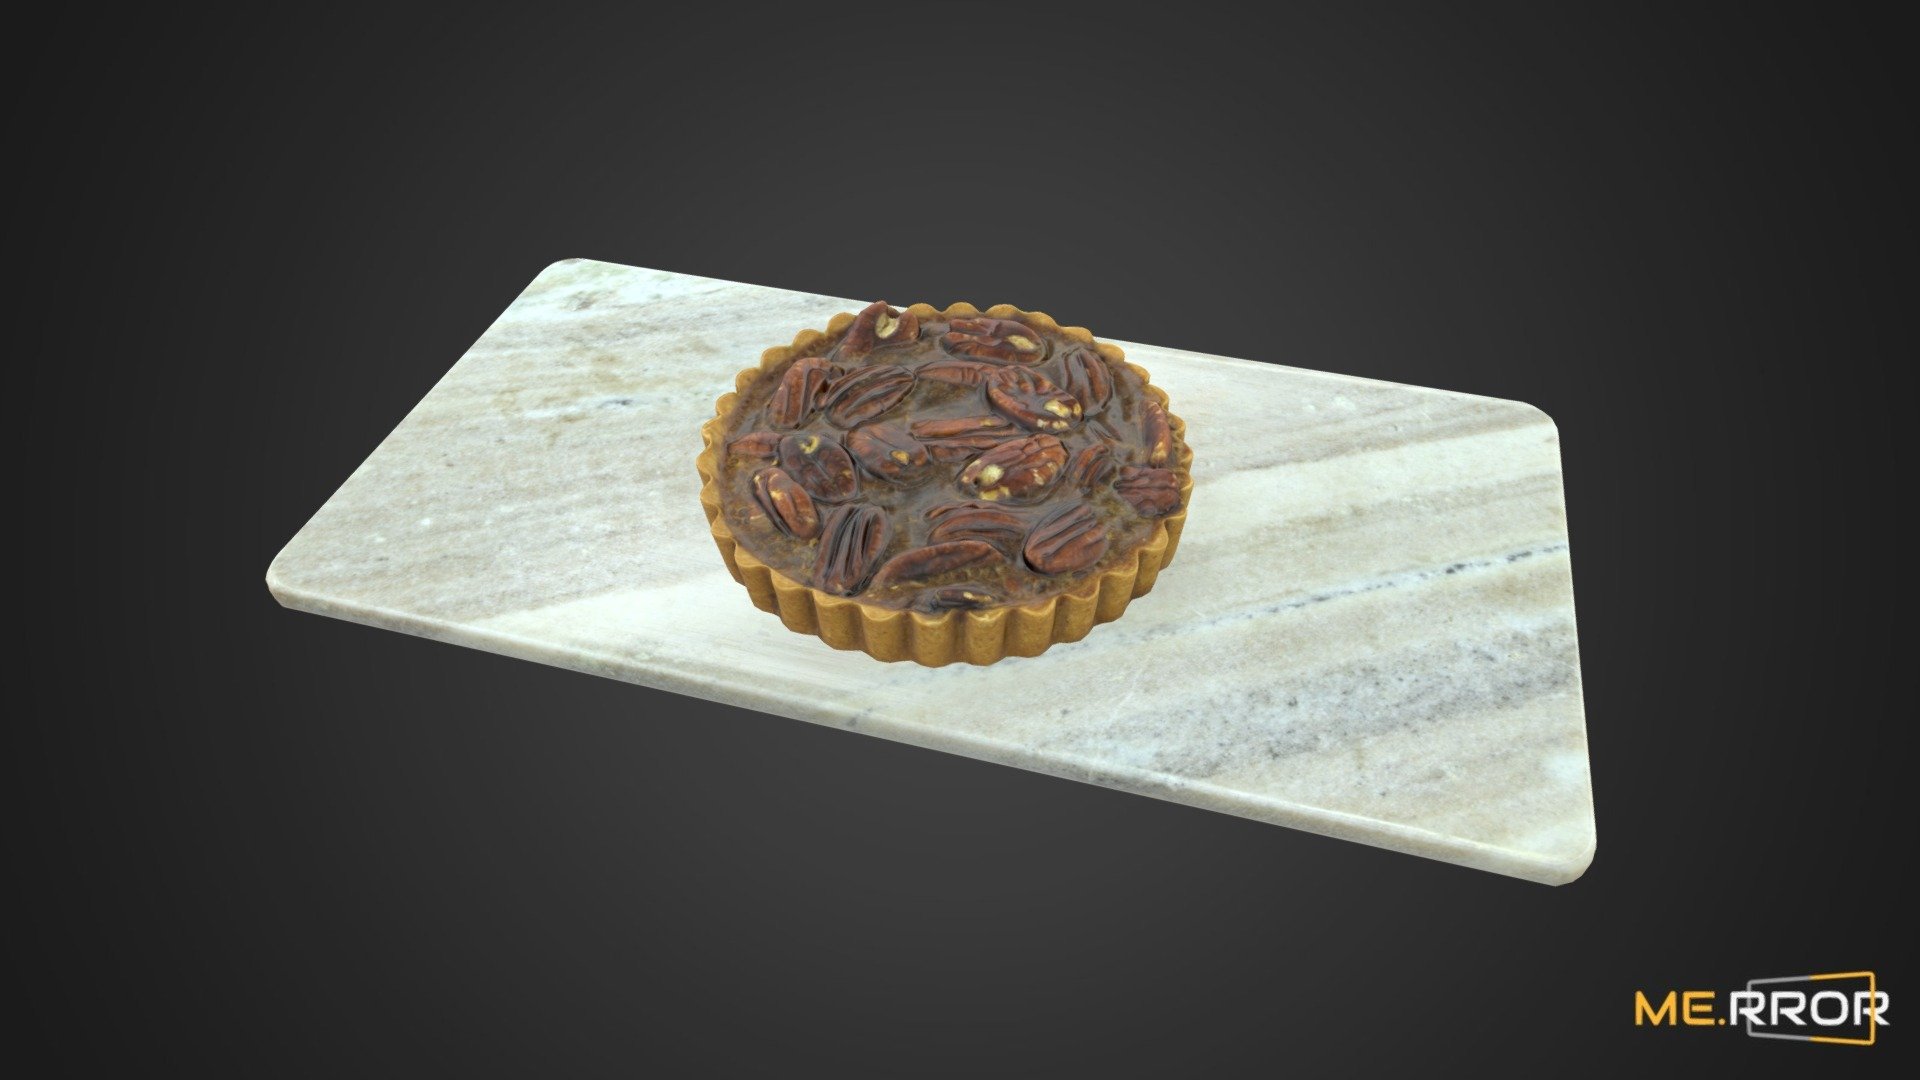 MERROR is a 3D Content PLATFORM which introduces various Asian assets to the 3D world


3DScanning #Photogrametry #ME.RROR - [Game-Ready] Pecan Pie - Buy Royalty Free 3D model by ME.RROR Studio (@merror) 3d model